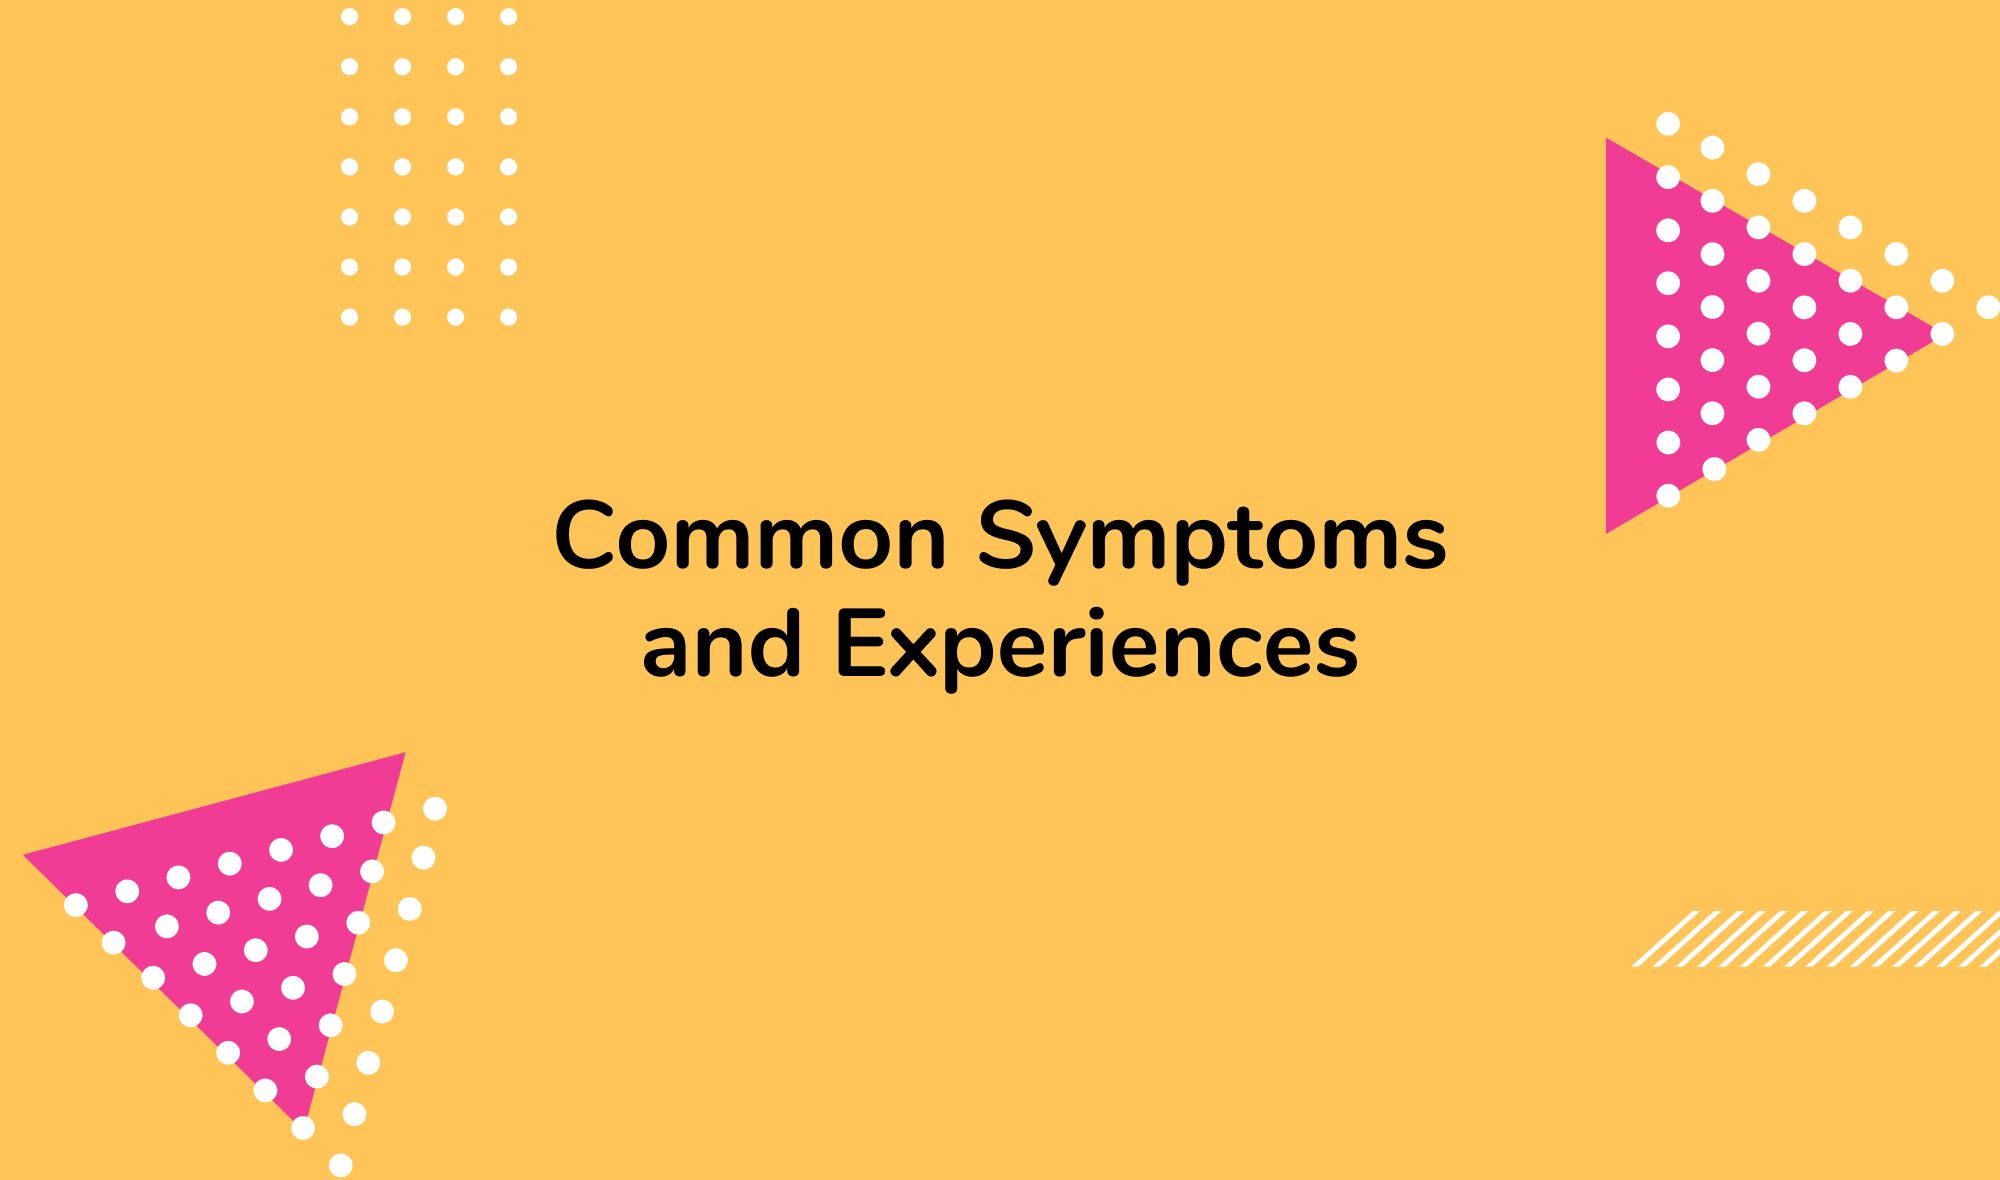 I Don't Feel Like Myself: Common Symptoms and Experiences